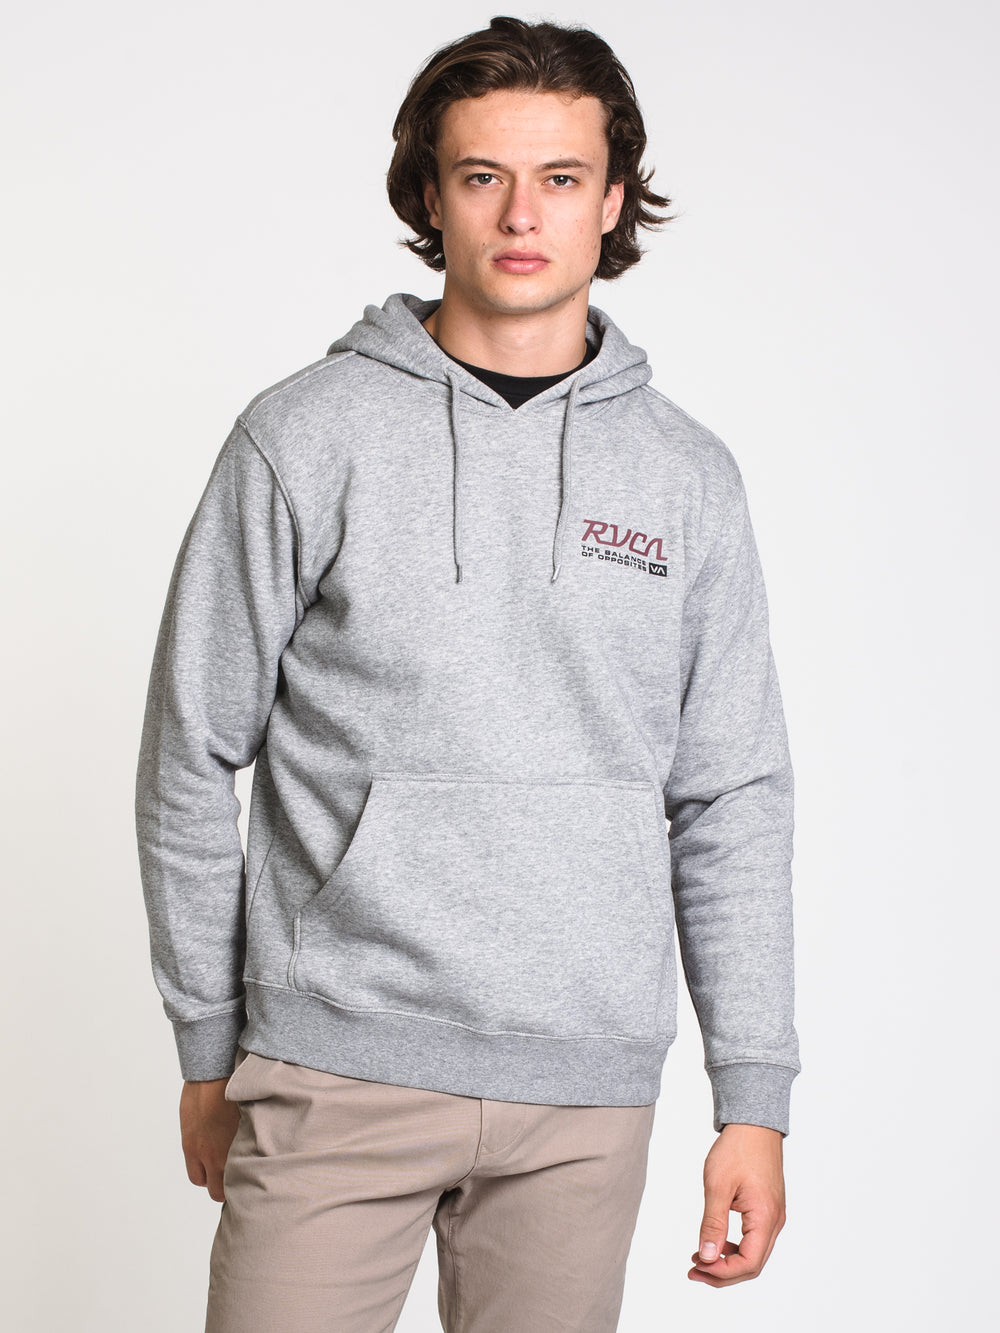 RVCA TRANSMISSION PULLOVER HOODIE  - CLEARANCE